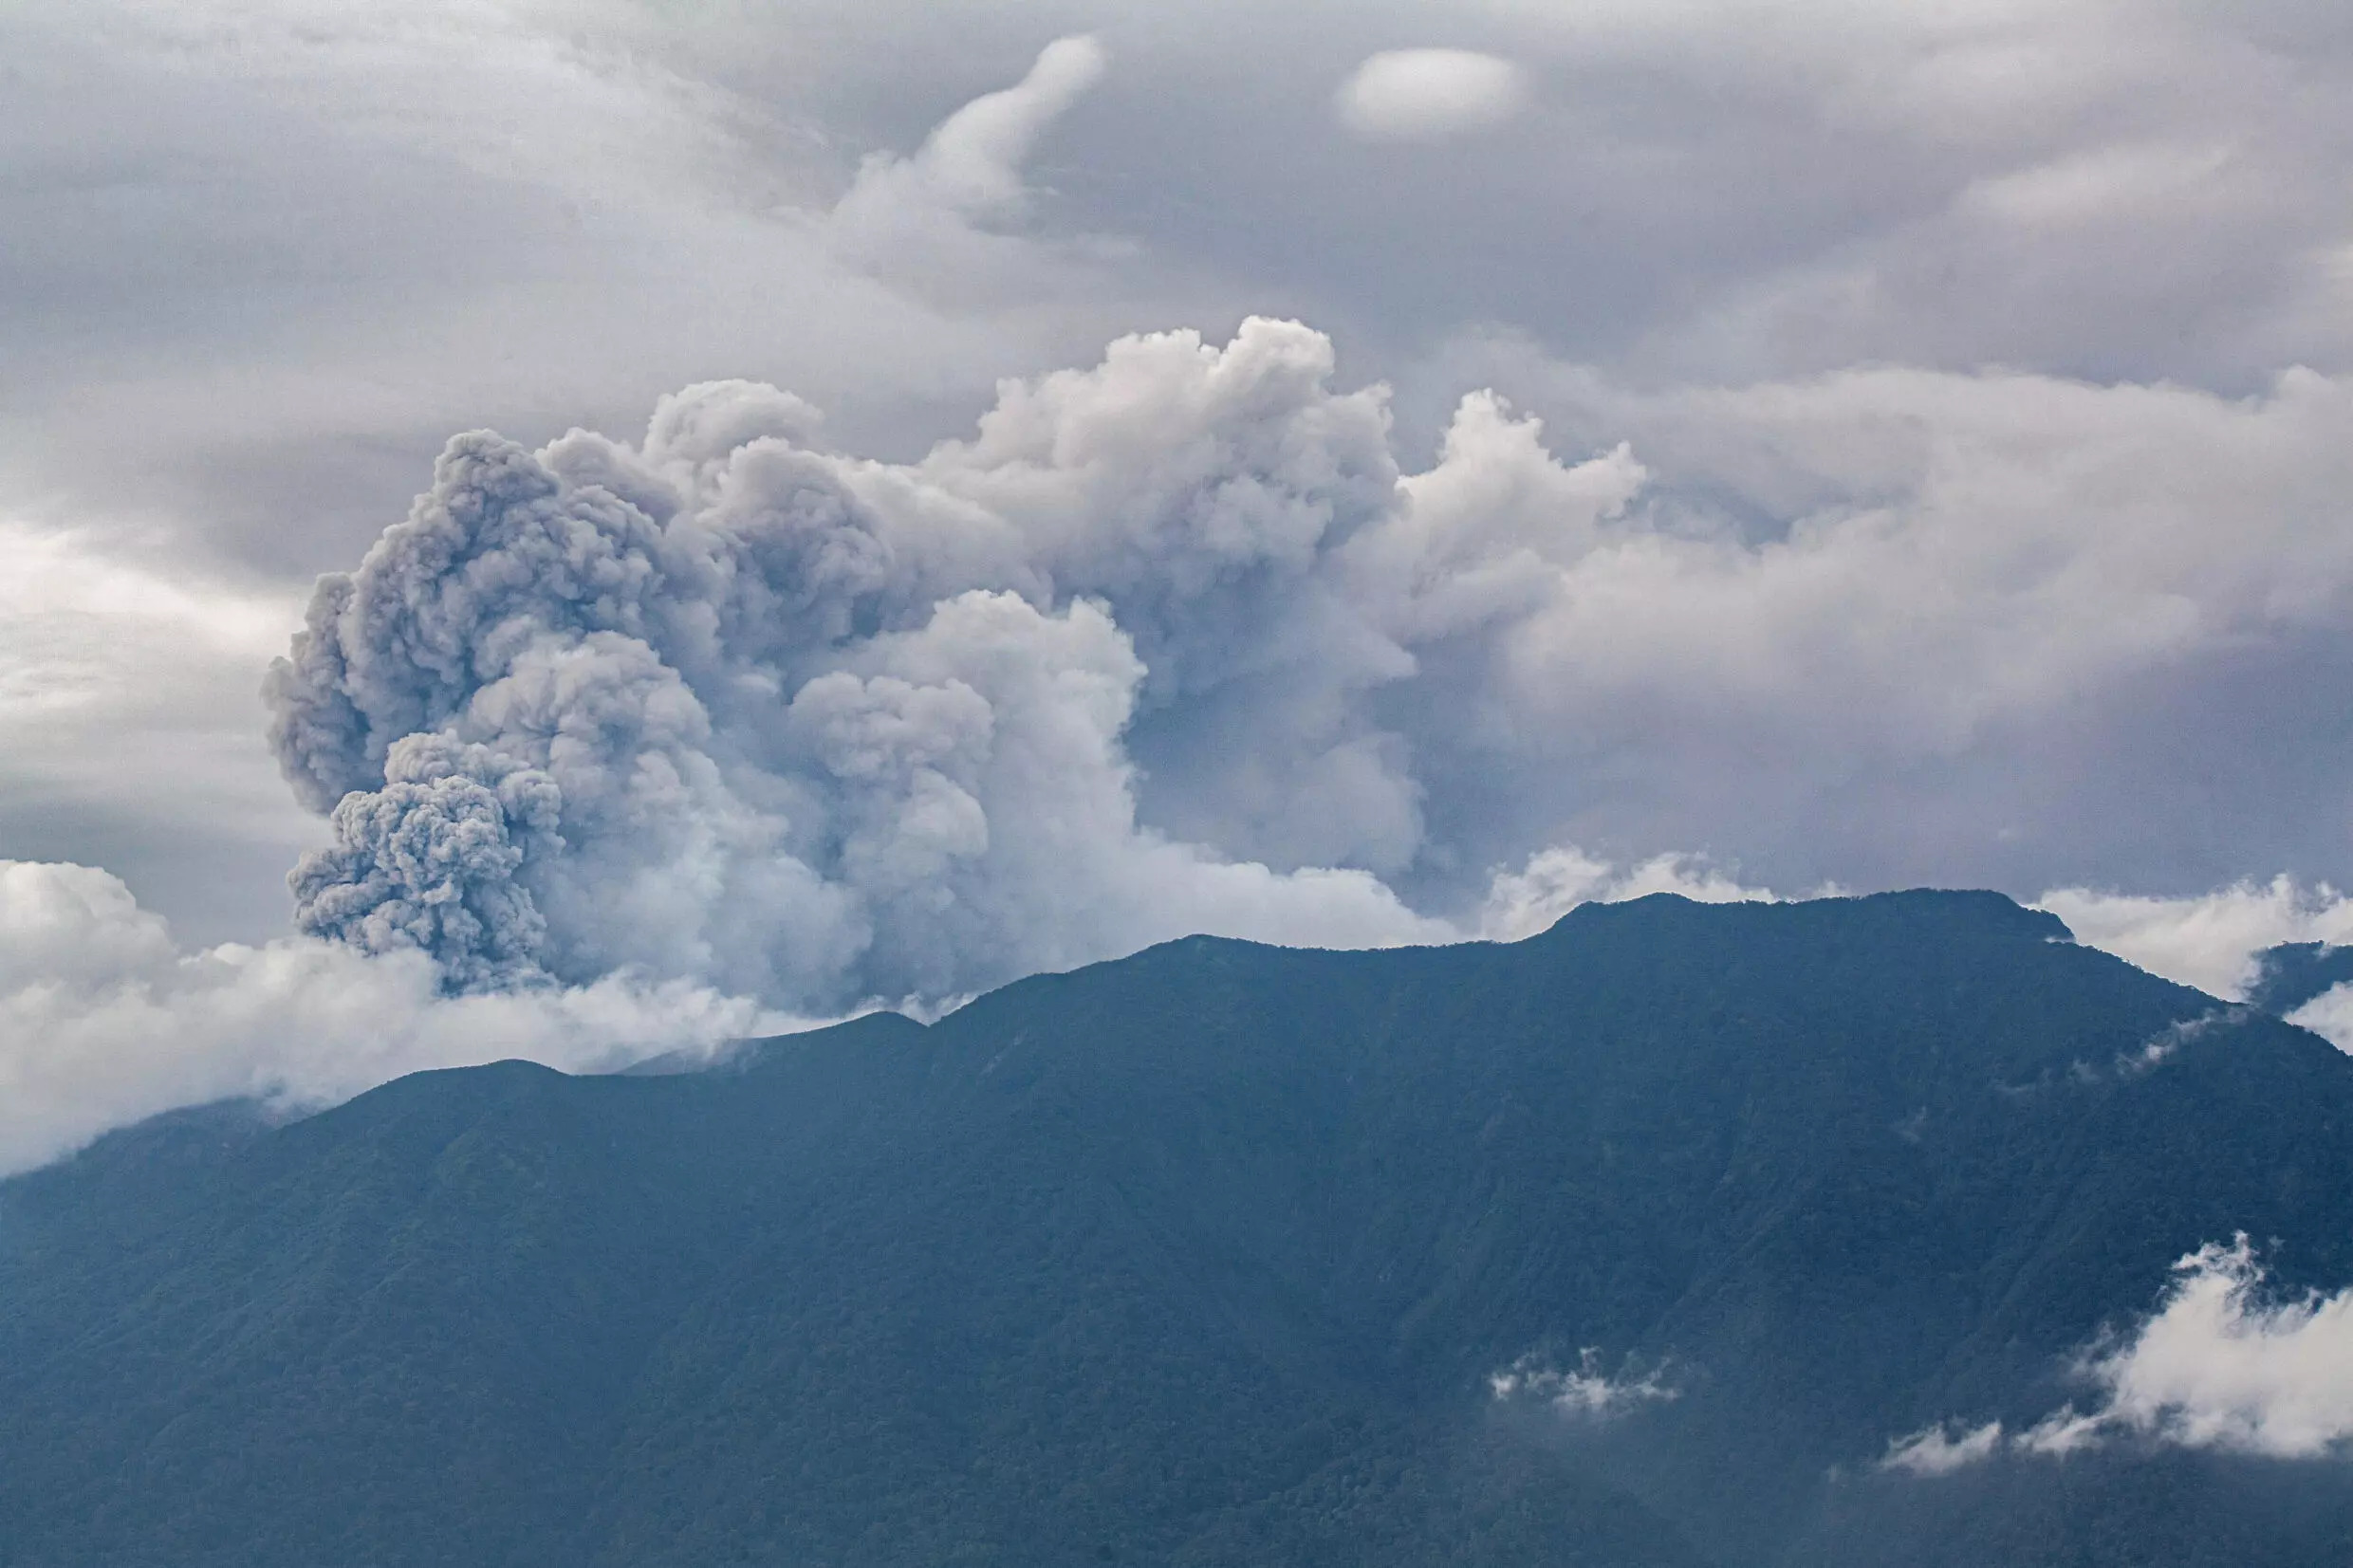 Mount Marapi on the island of Sumatra, with a peak of 2,891 meters, is on the third-highest alert level of Indonesia's four-step system. Photo: AFP